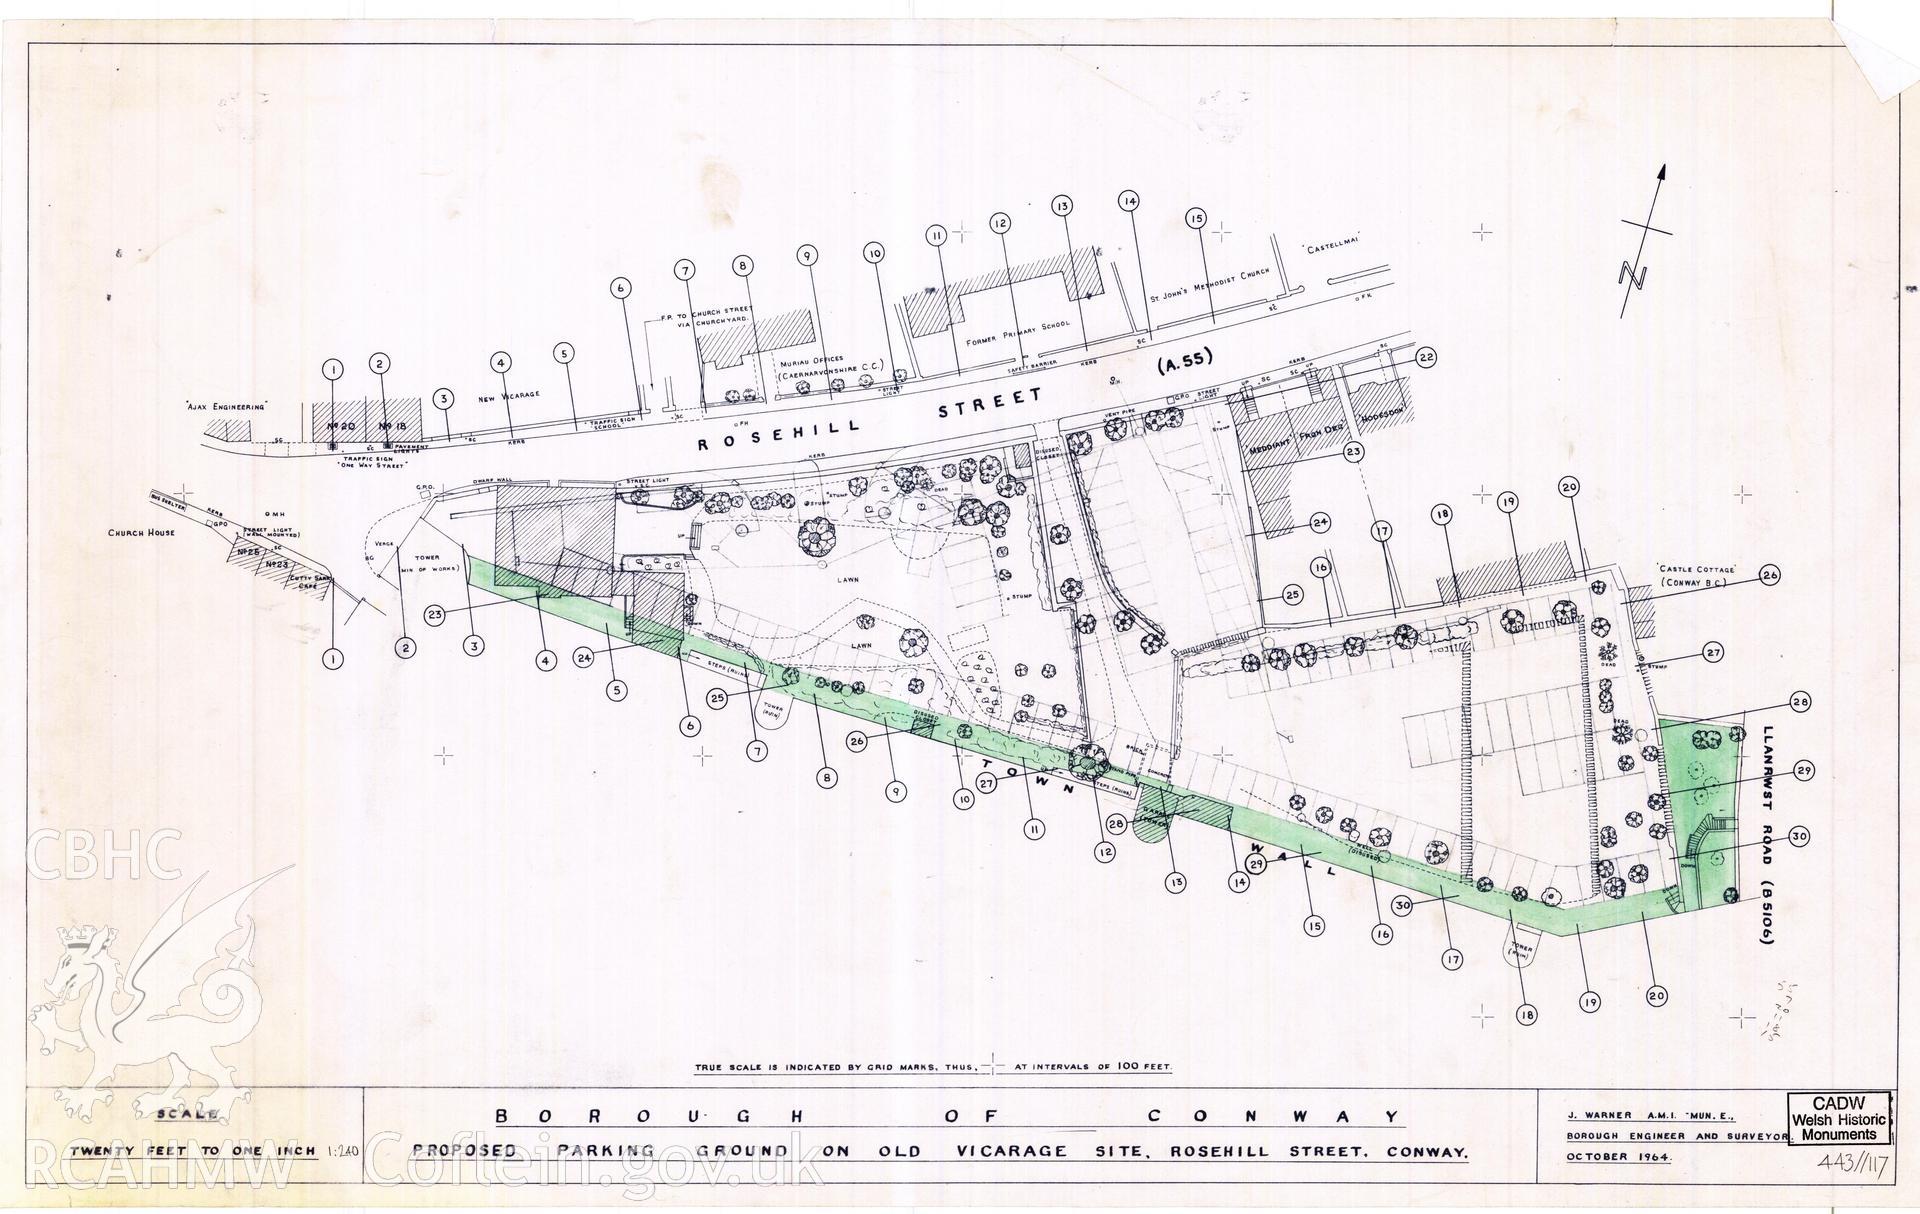 Digital copy of Cadw guardianship monument drawing of Conwy Walls, proposed parking ground on Old  Vicarage Site, Rosehill Street, Conway. Cadw Ref. No:443//117. Scale 1:240. October 1964.